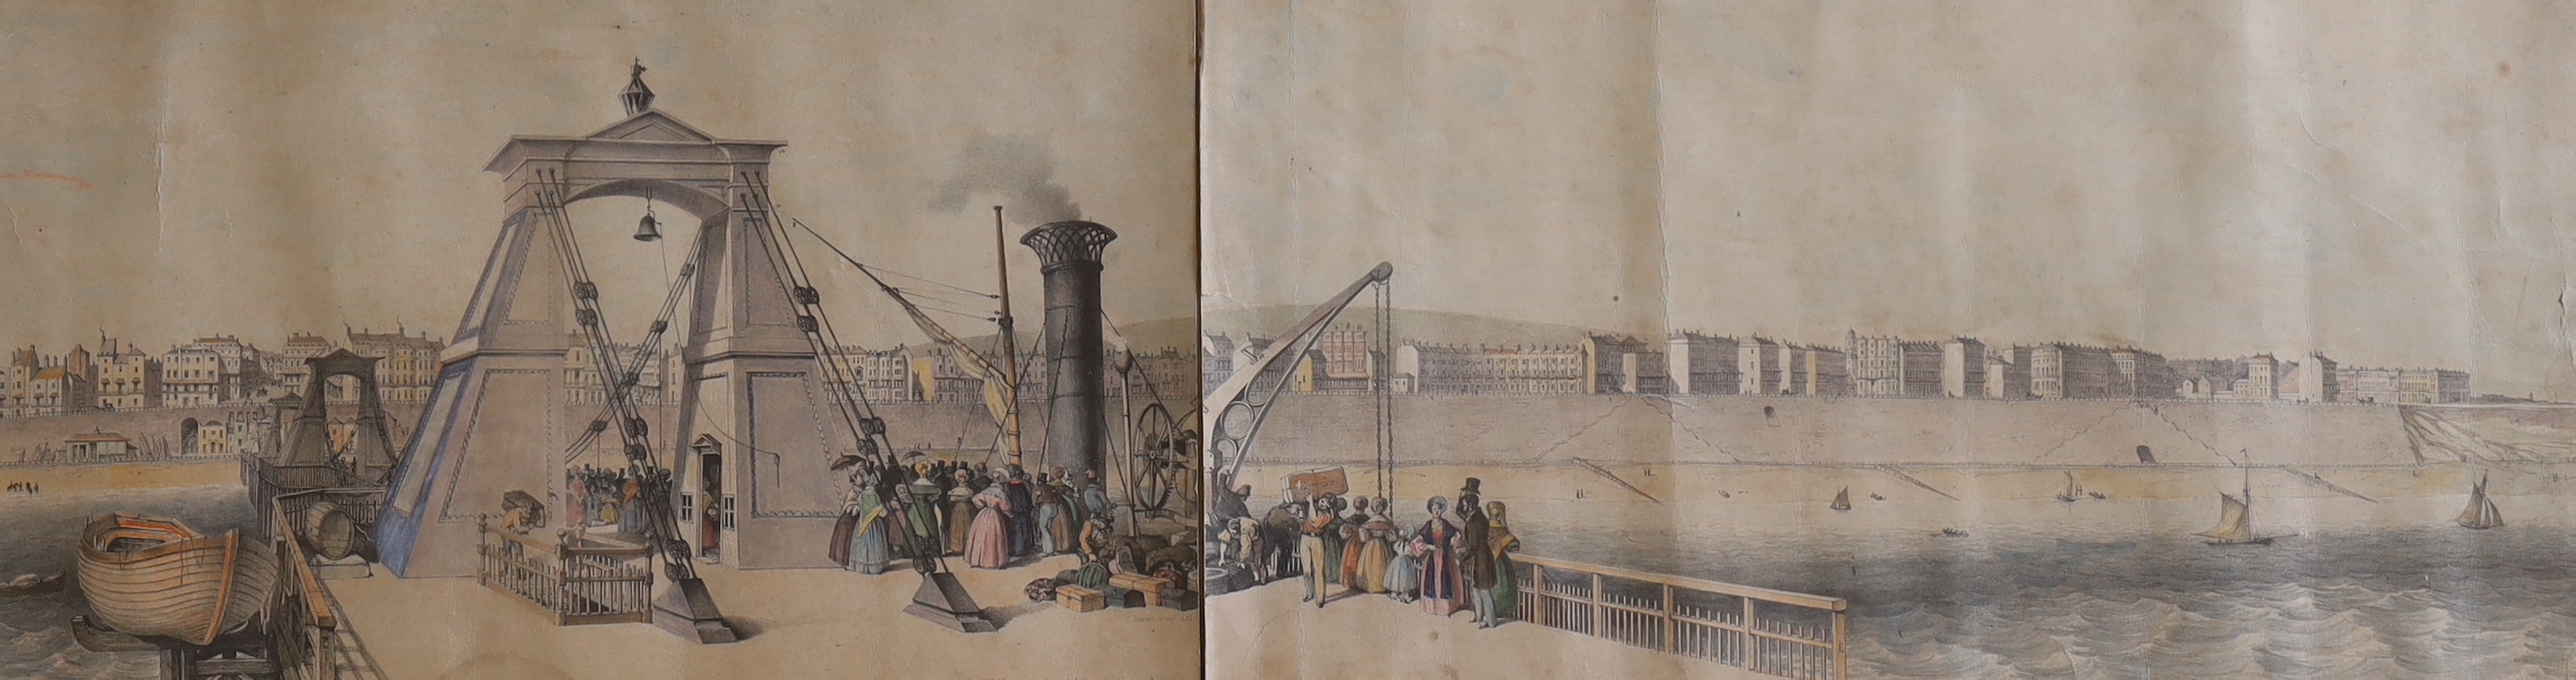 C. Darby Esq (19th C.), hand coloured lithograph, 'Brighton 1839', published for the benefit of the Sussex County Hospital. Sold By W.H.Mason & H. Hering, 9 Newman St, London, conjoined 24 x 82cm